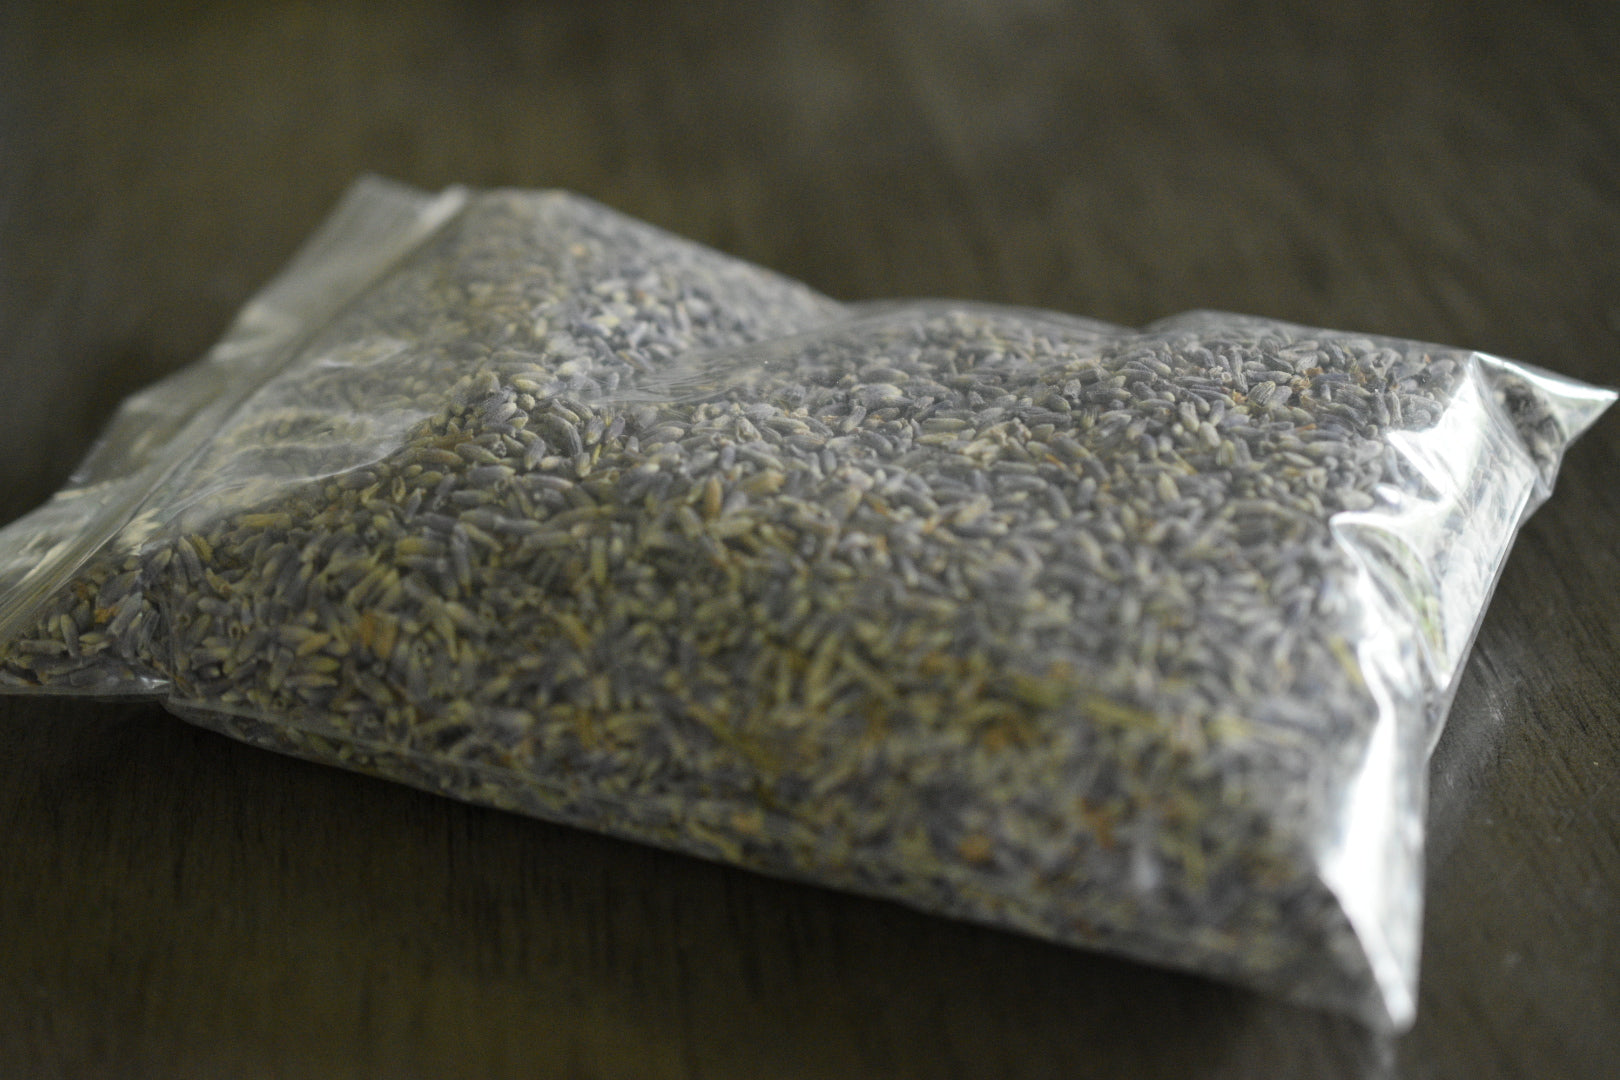 A plastic bag filled with lavender petals rests on a wooden surface to show the packaged product. The lavender is a soft purple with hints of blue.